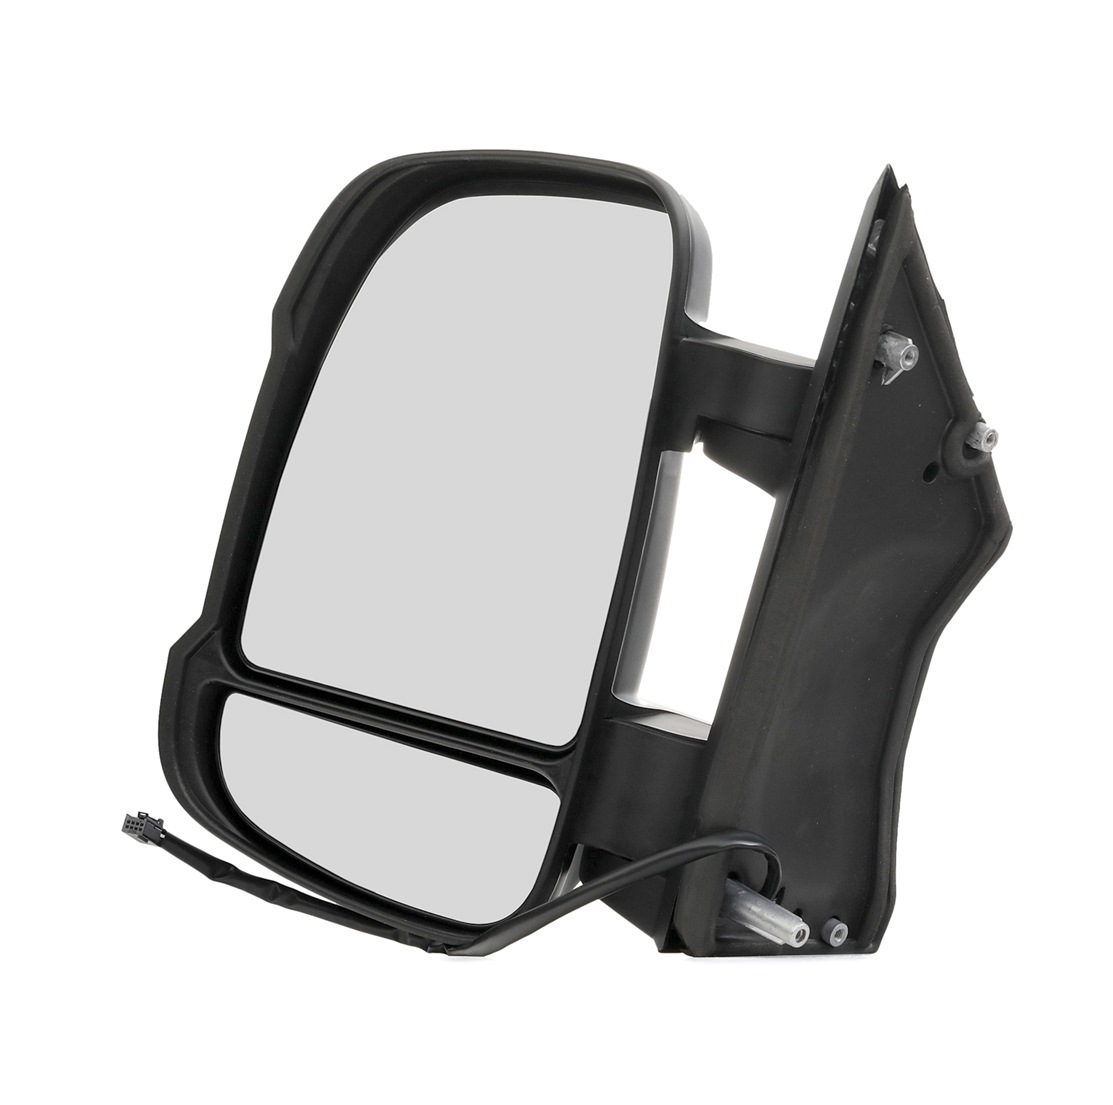 STARK SKOM-1040107 Wing mirror Left, Electric, Heated, Complete Mirror, with wide angle mirror, Short mirror arm, Convex, for left-hand drive vehicles